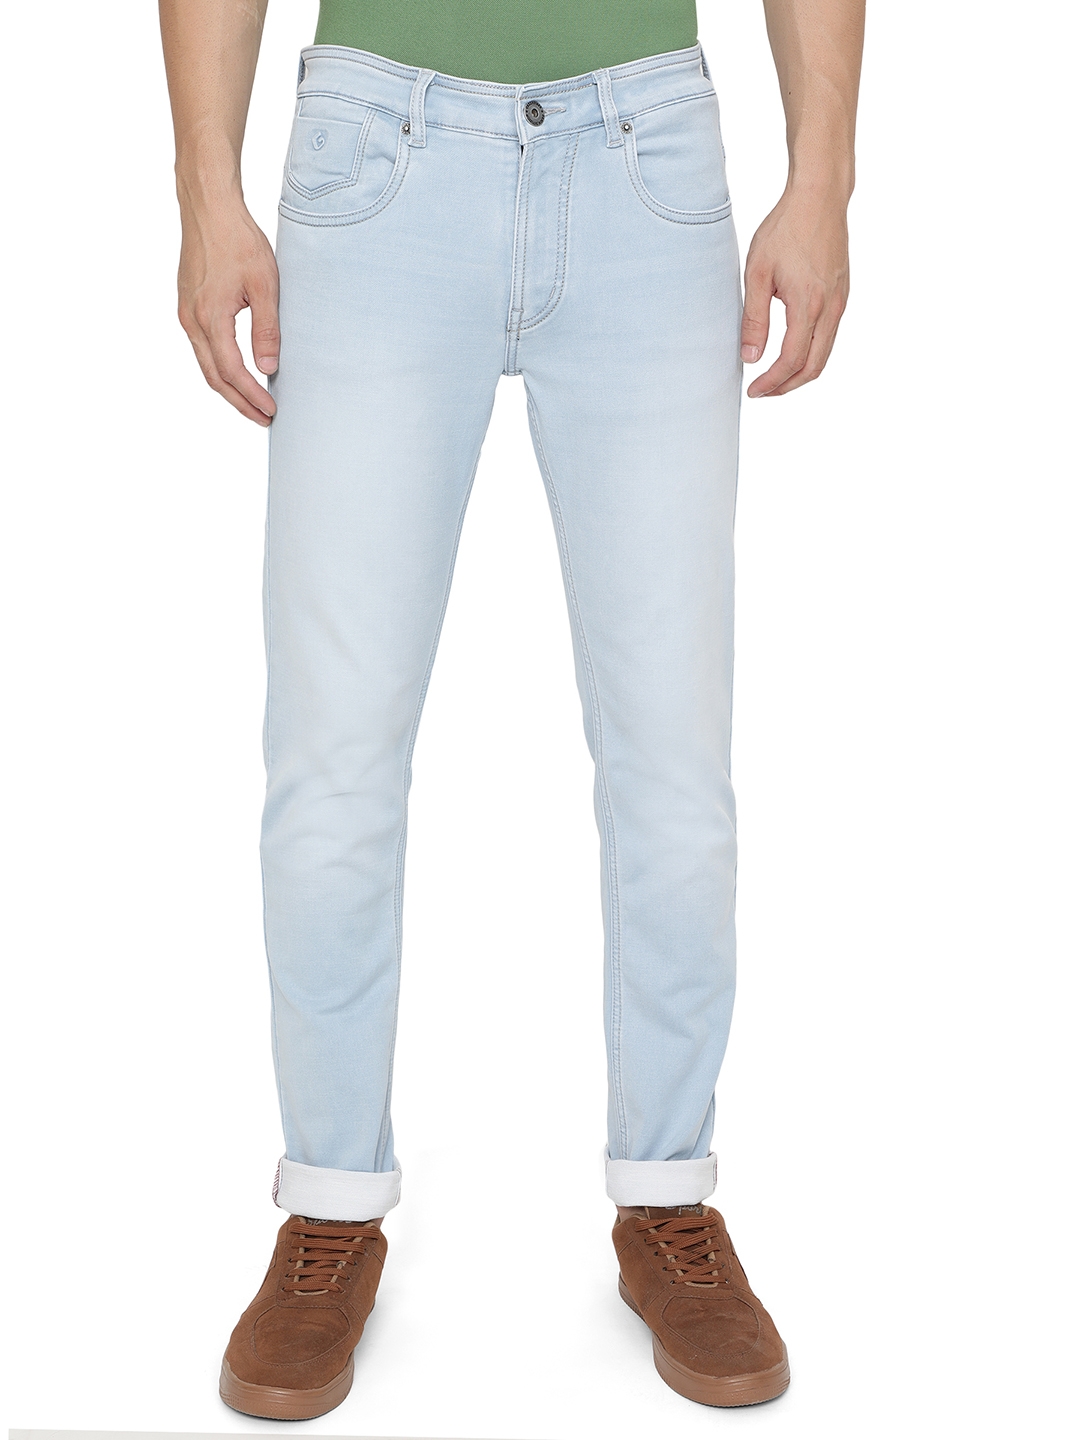 Greenfibre | Ice Blue Solid Narrow Fit Jeans | Greenfibre 0